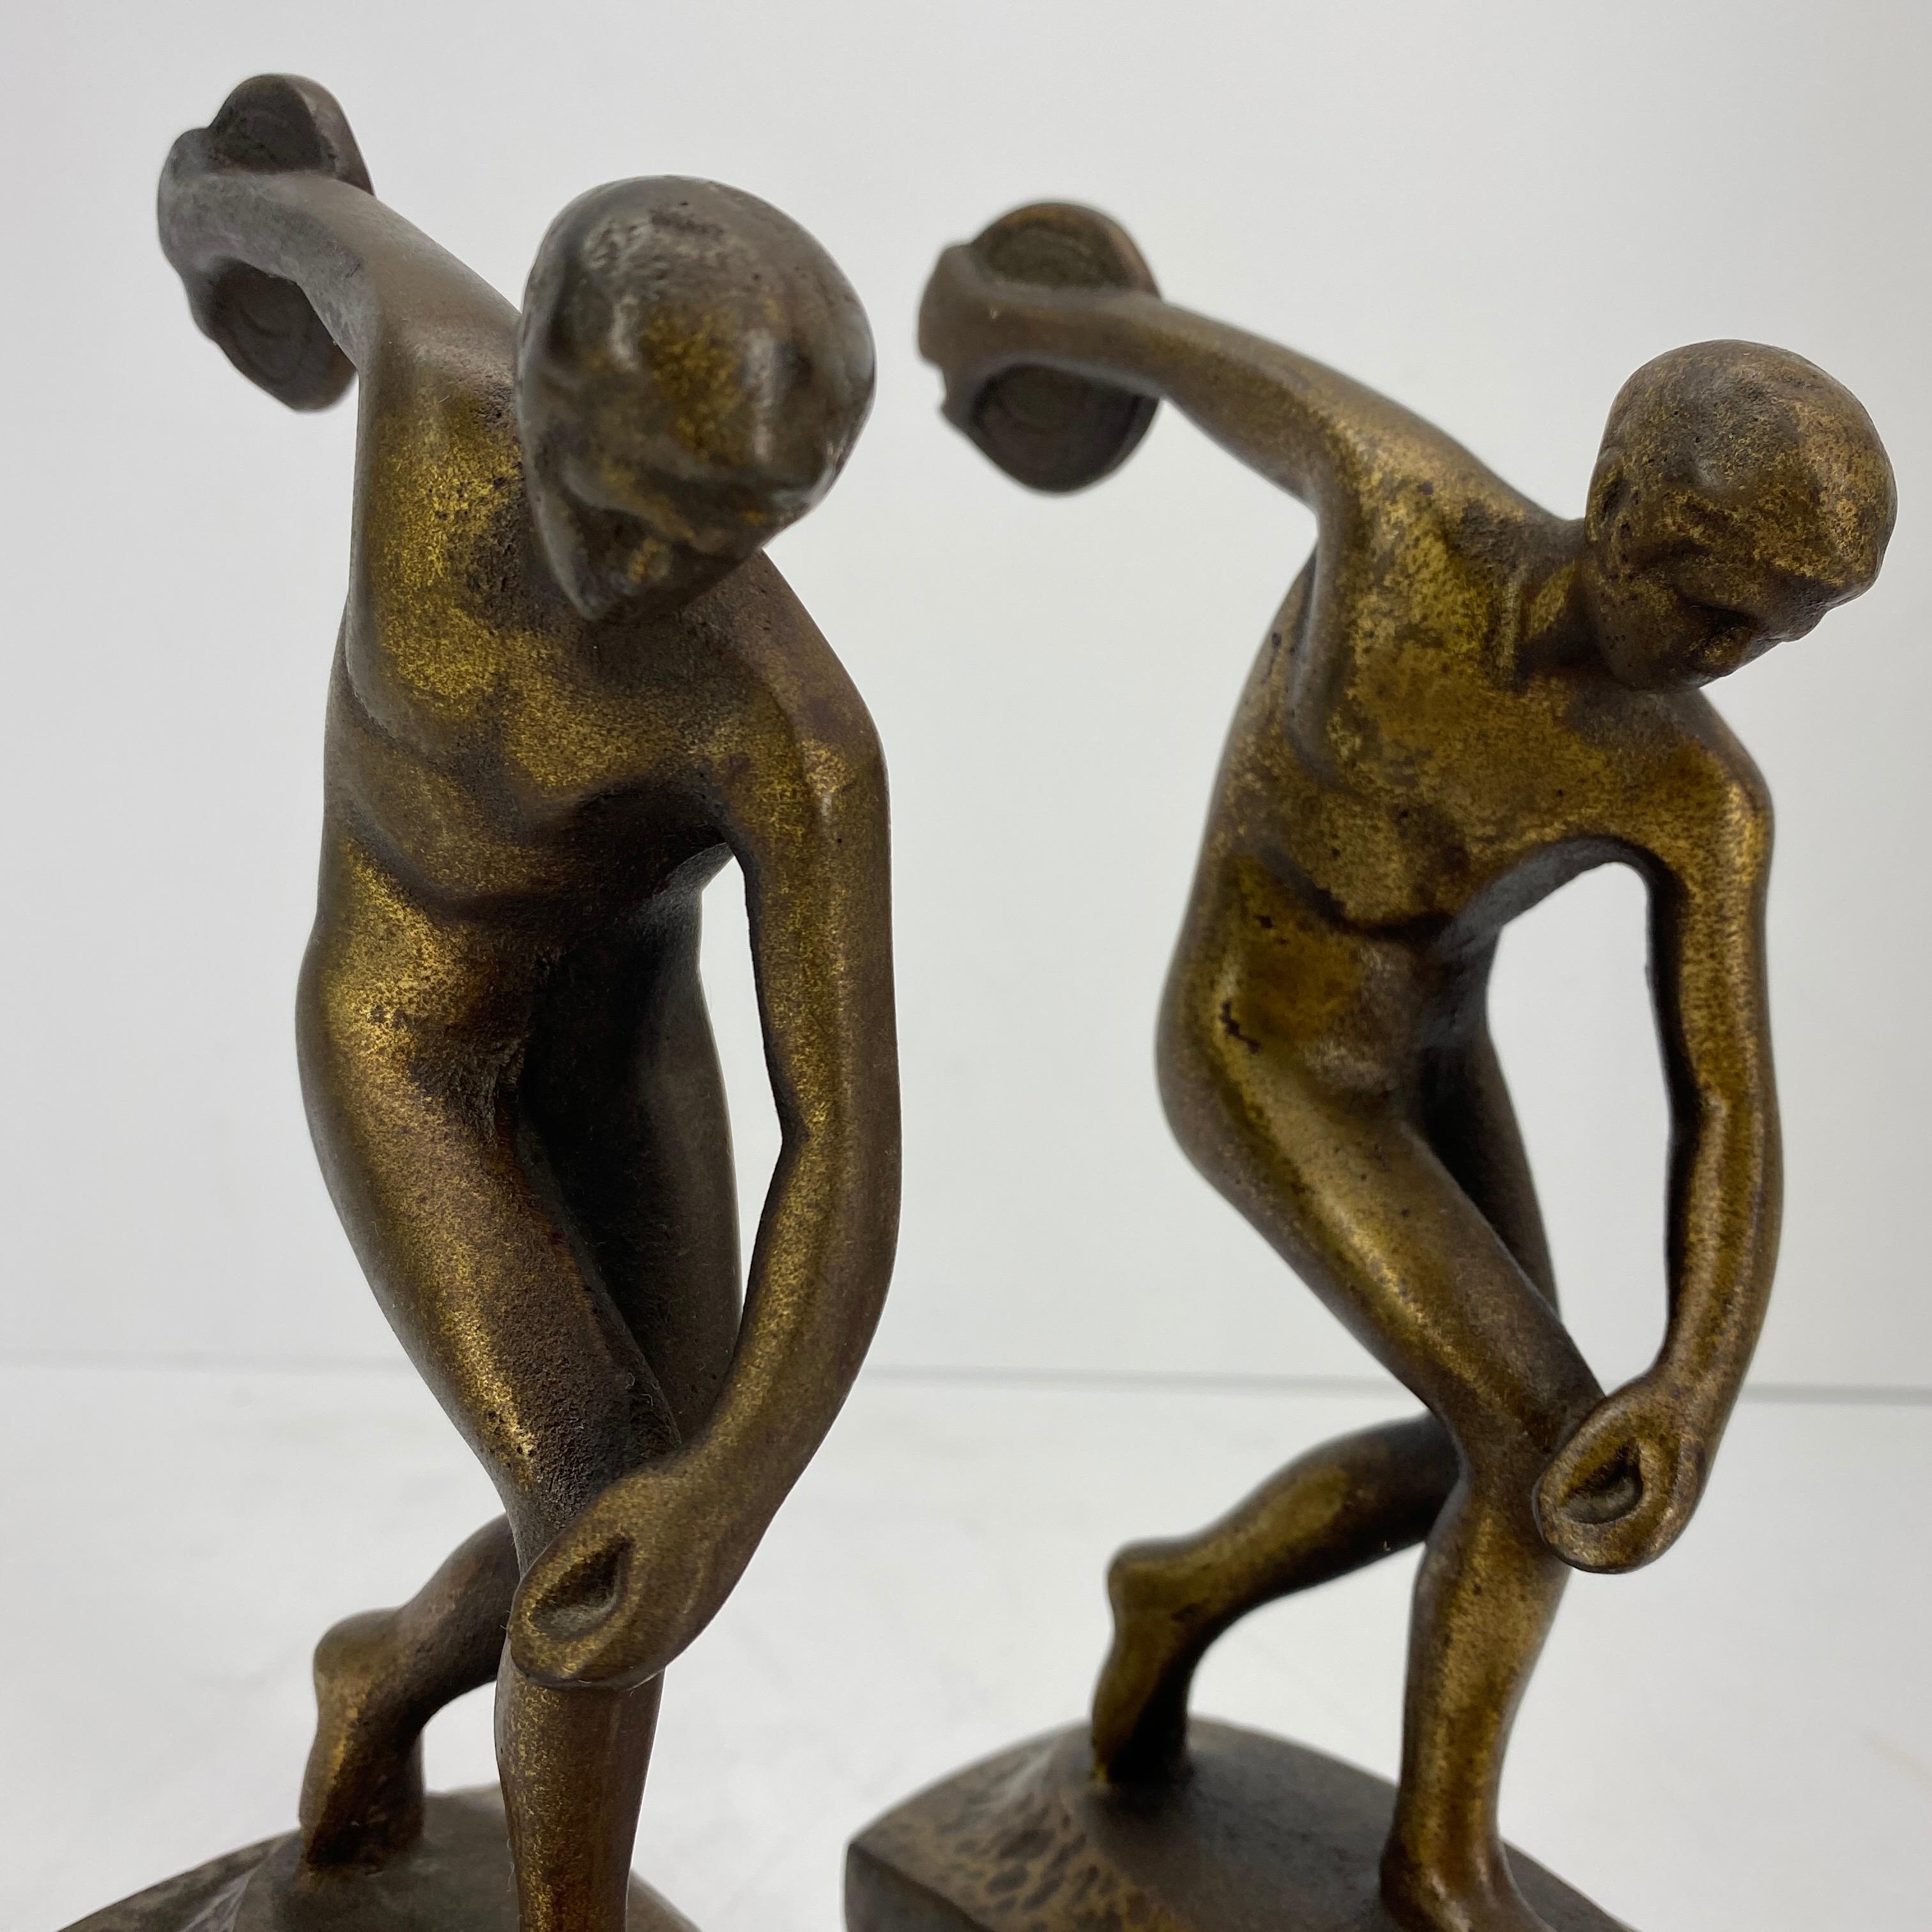 Vintage Cast Iron and Bronzed Overlay Bookends of Male Discus Thrower 1